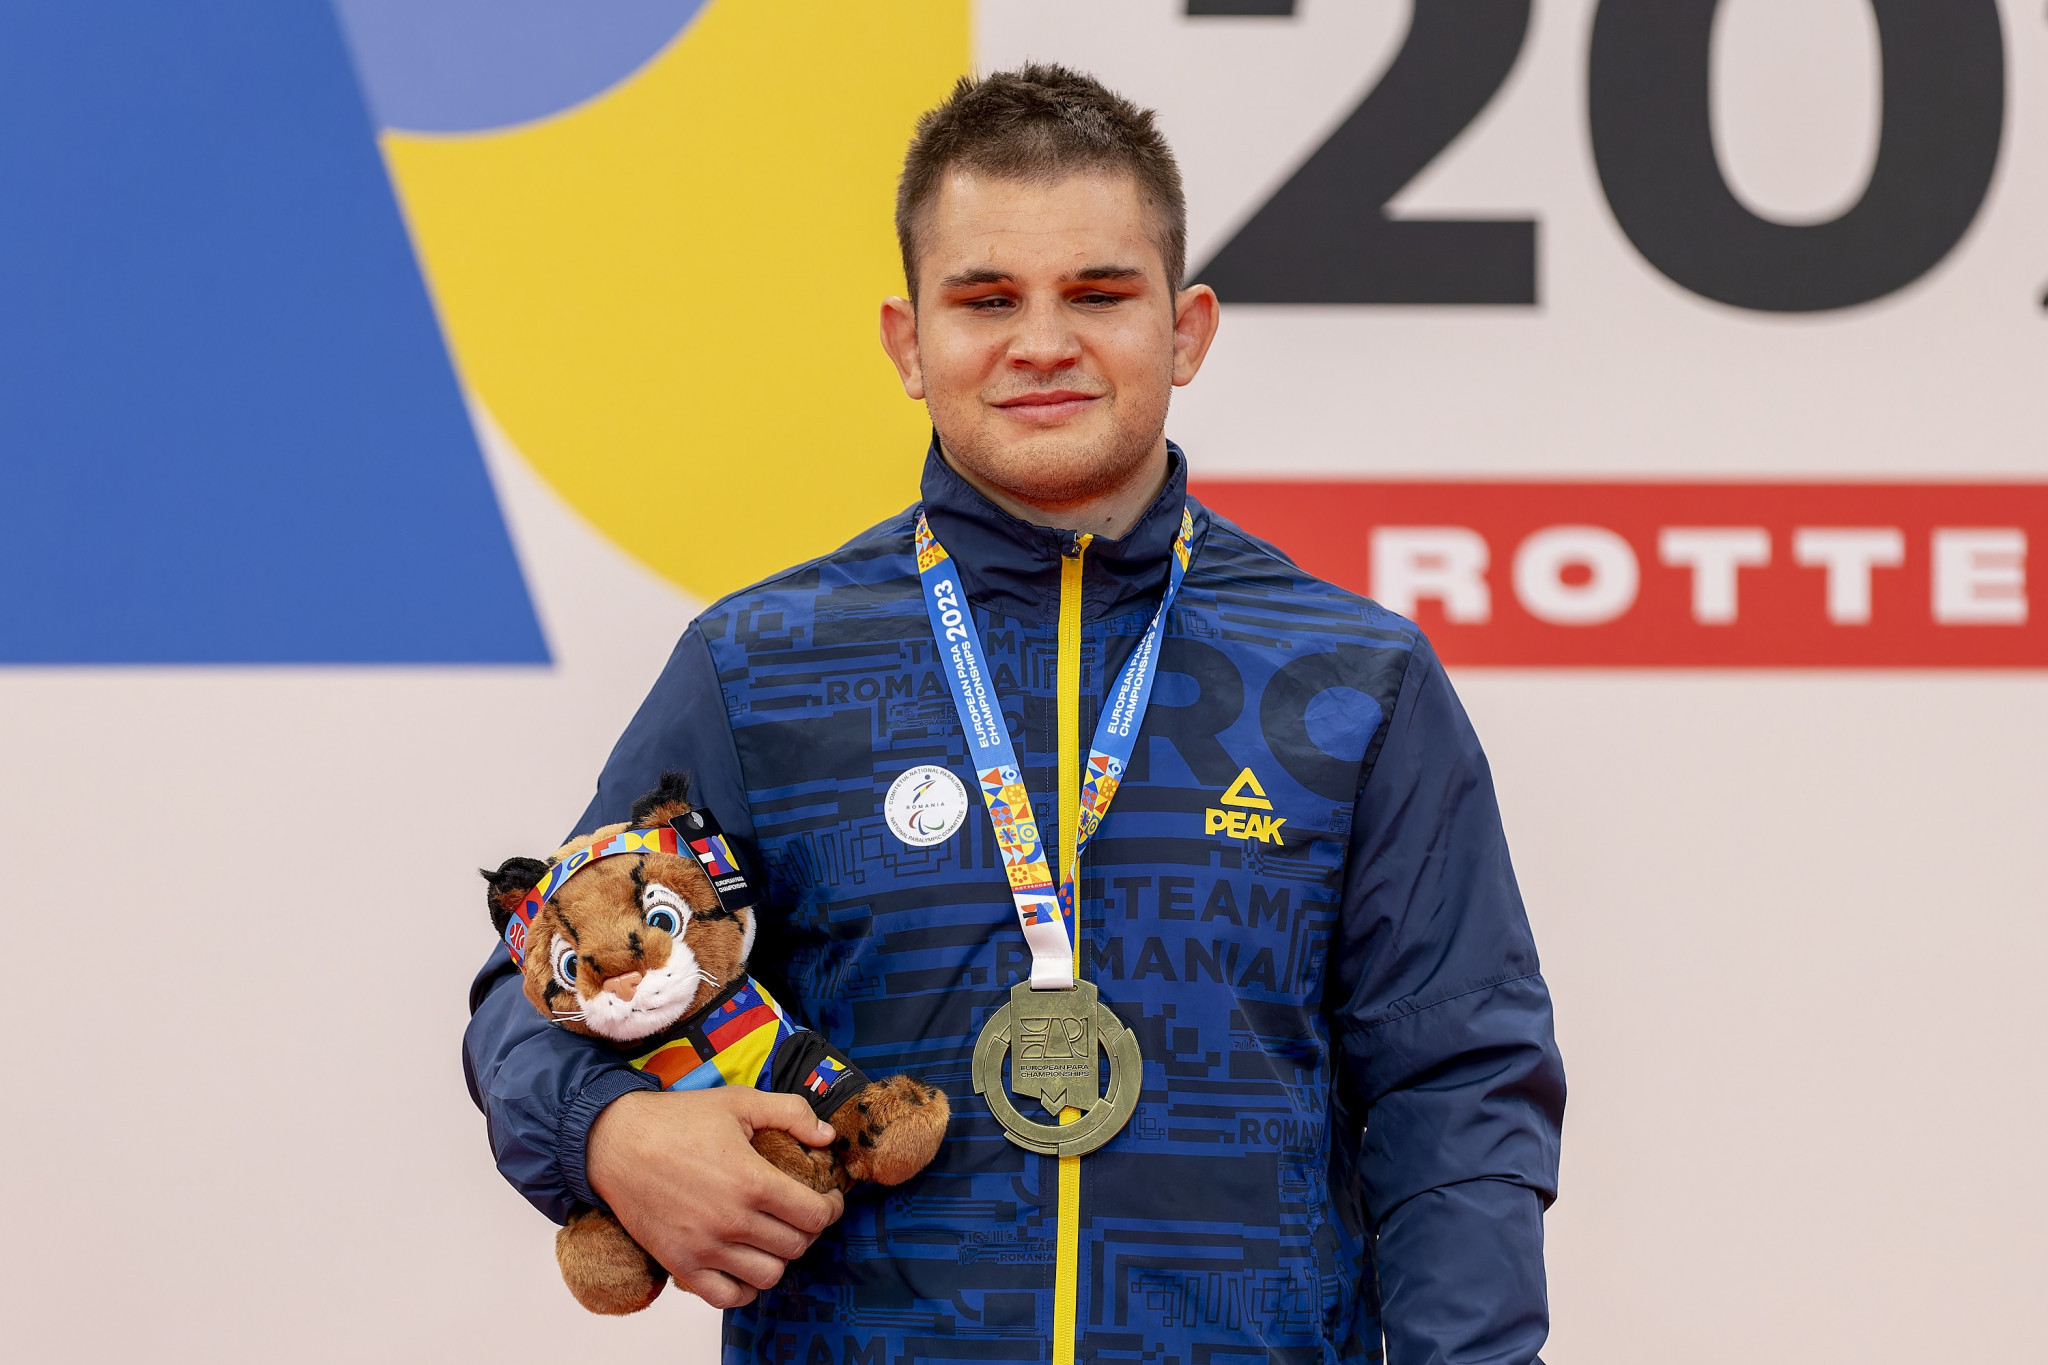 Romania’s Alex Bologa made history by becoming the first gold medallist at the inaugural European Para Championships with victory in the J1 men’s under-73kg category ©EPC